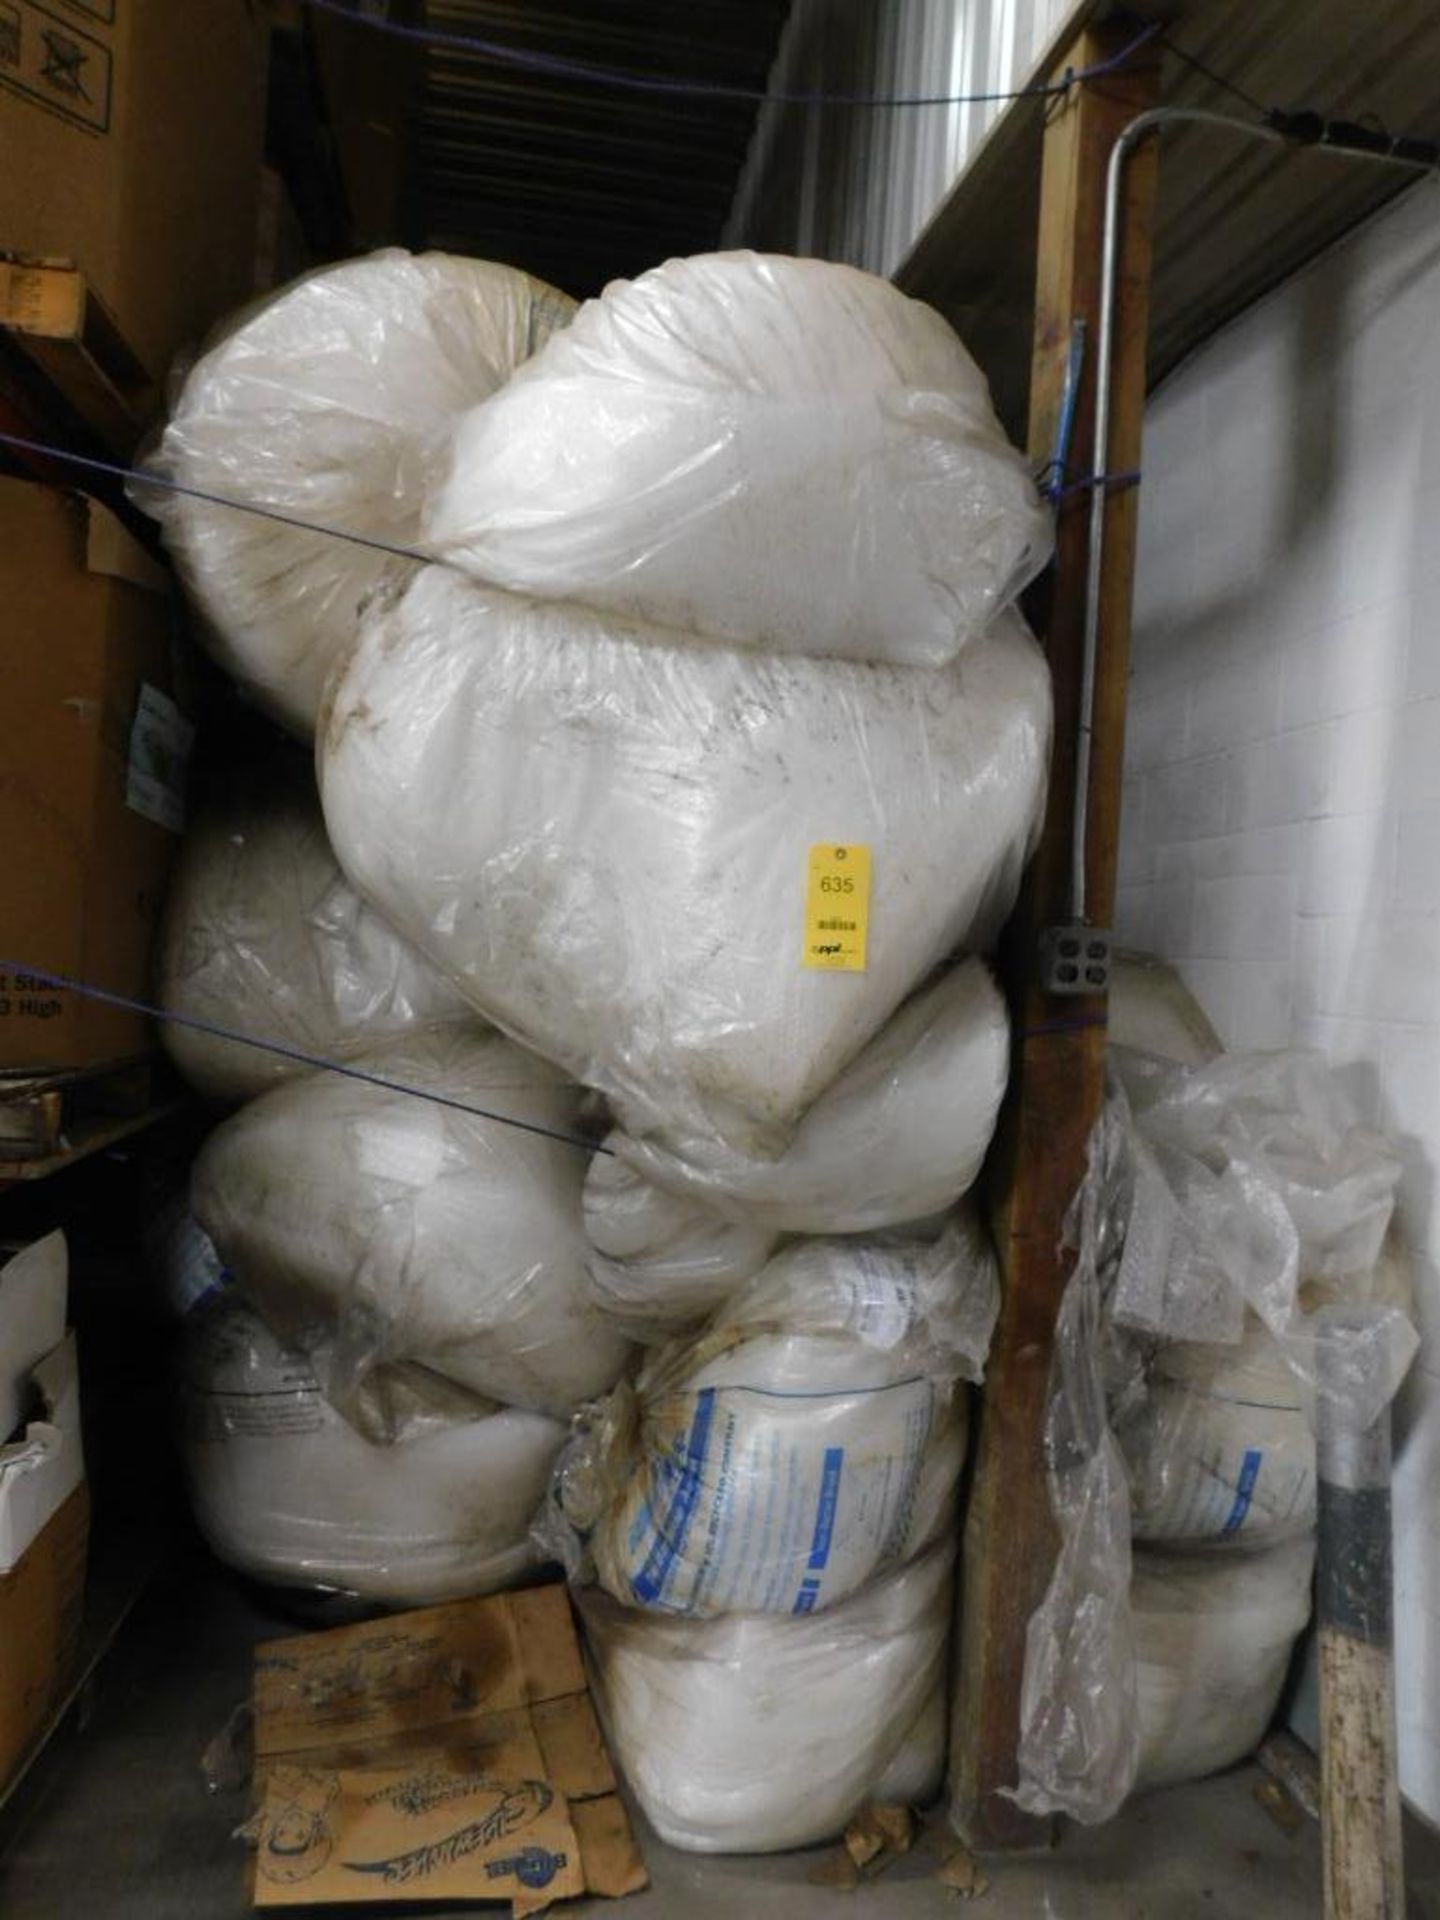 LOT: Large Quantity of Unused Bubble Wrap Behind Pallet Racking (Building #2) (LOCATION: 6738 6TH